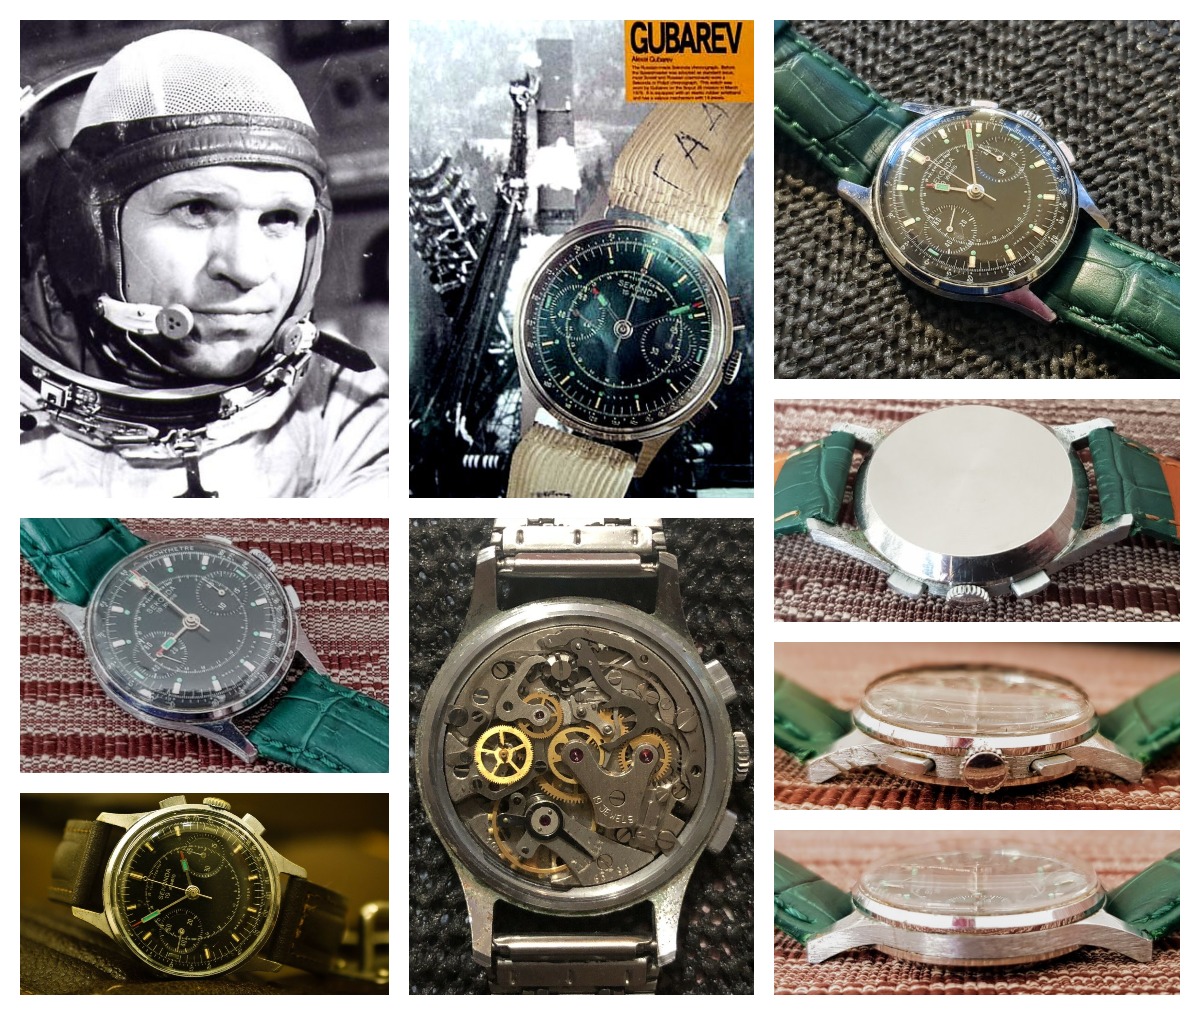 Gubarev wore a black Strela - branded Sekonda - Chronograph watch with the Poljot 3017 hand-wound movement during the Soyuz-28 mission. A great Omega Speedmaster alternative that is getting rare, but can still be found on eBay.